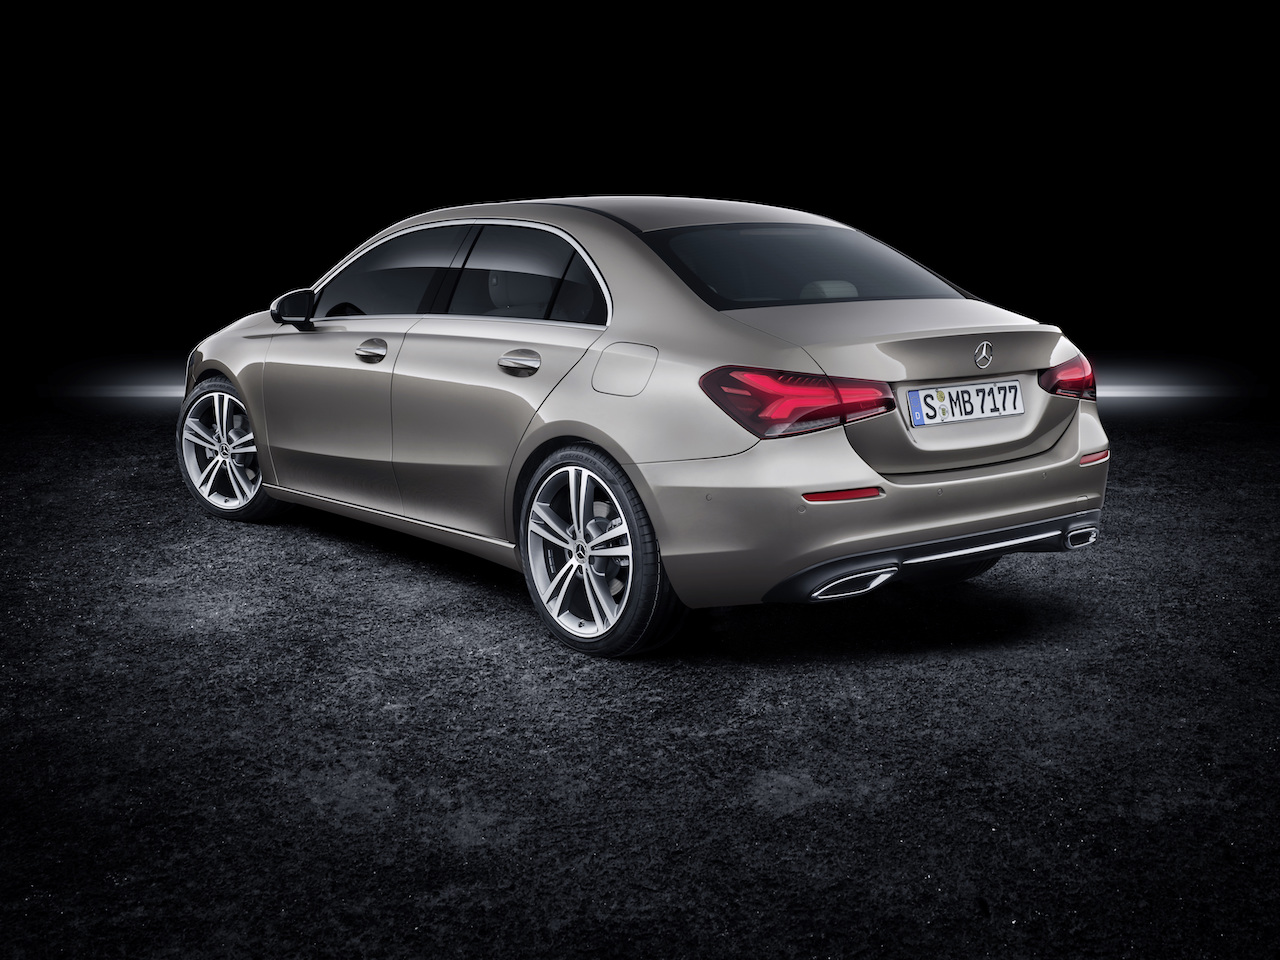 Mercedes A Class Sedan To Be Launched In India By 21 Report